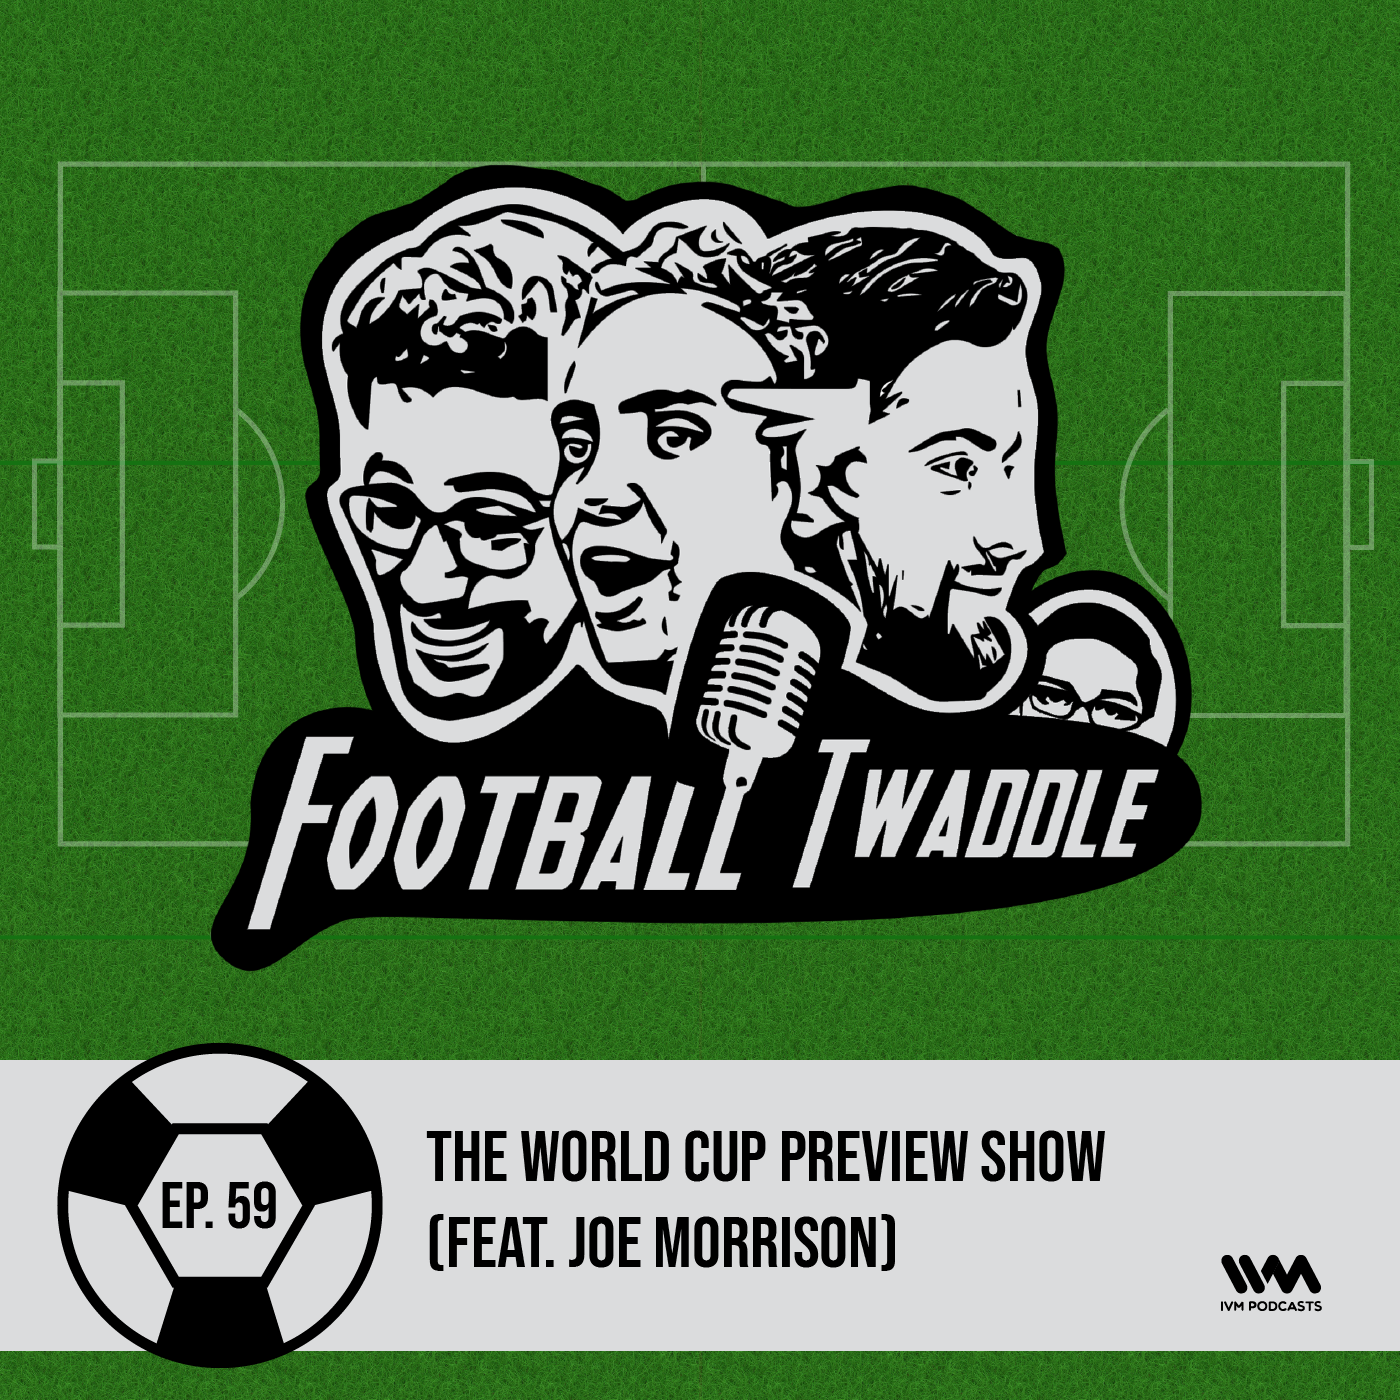 The World Cup Preview Show (feat. Joe Morrison)